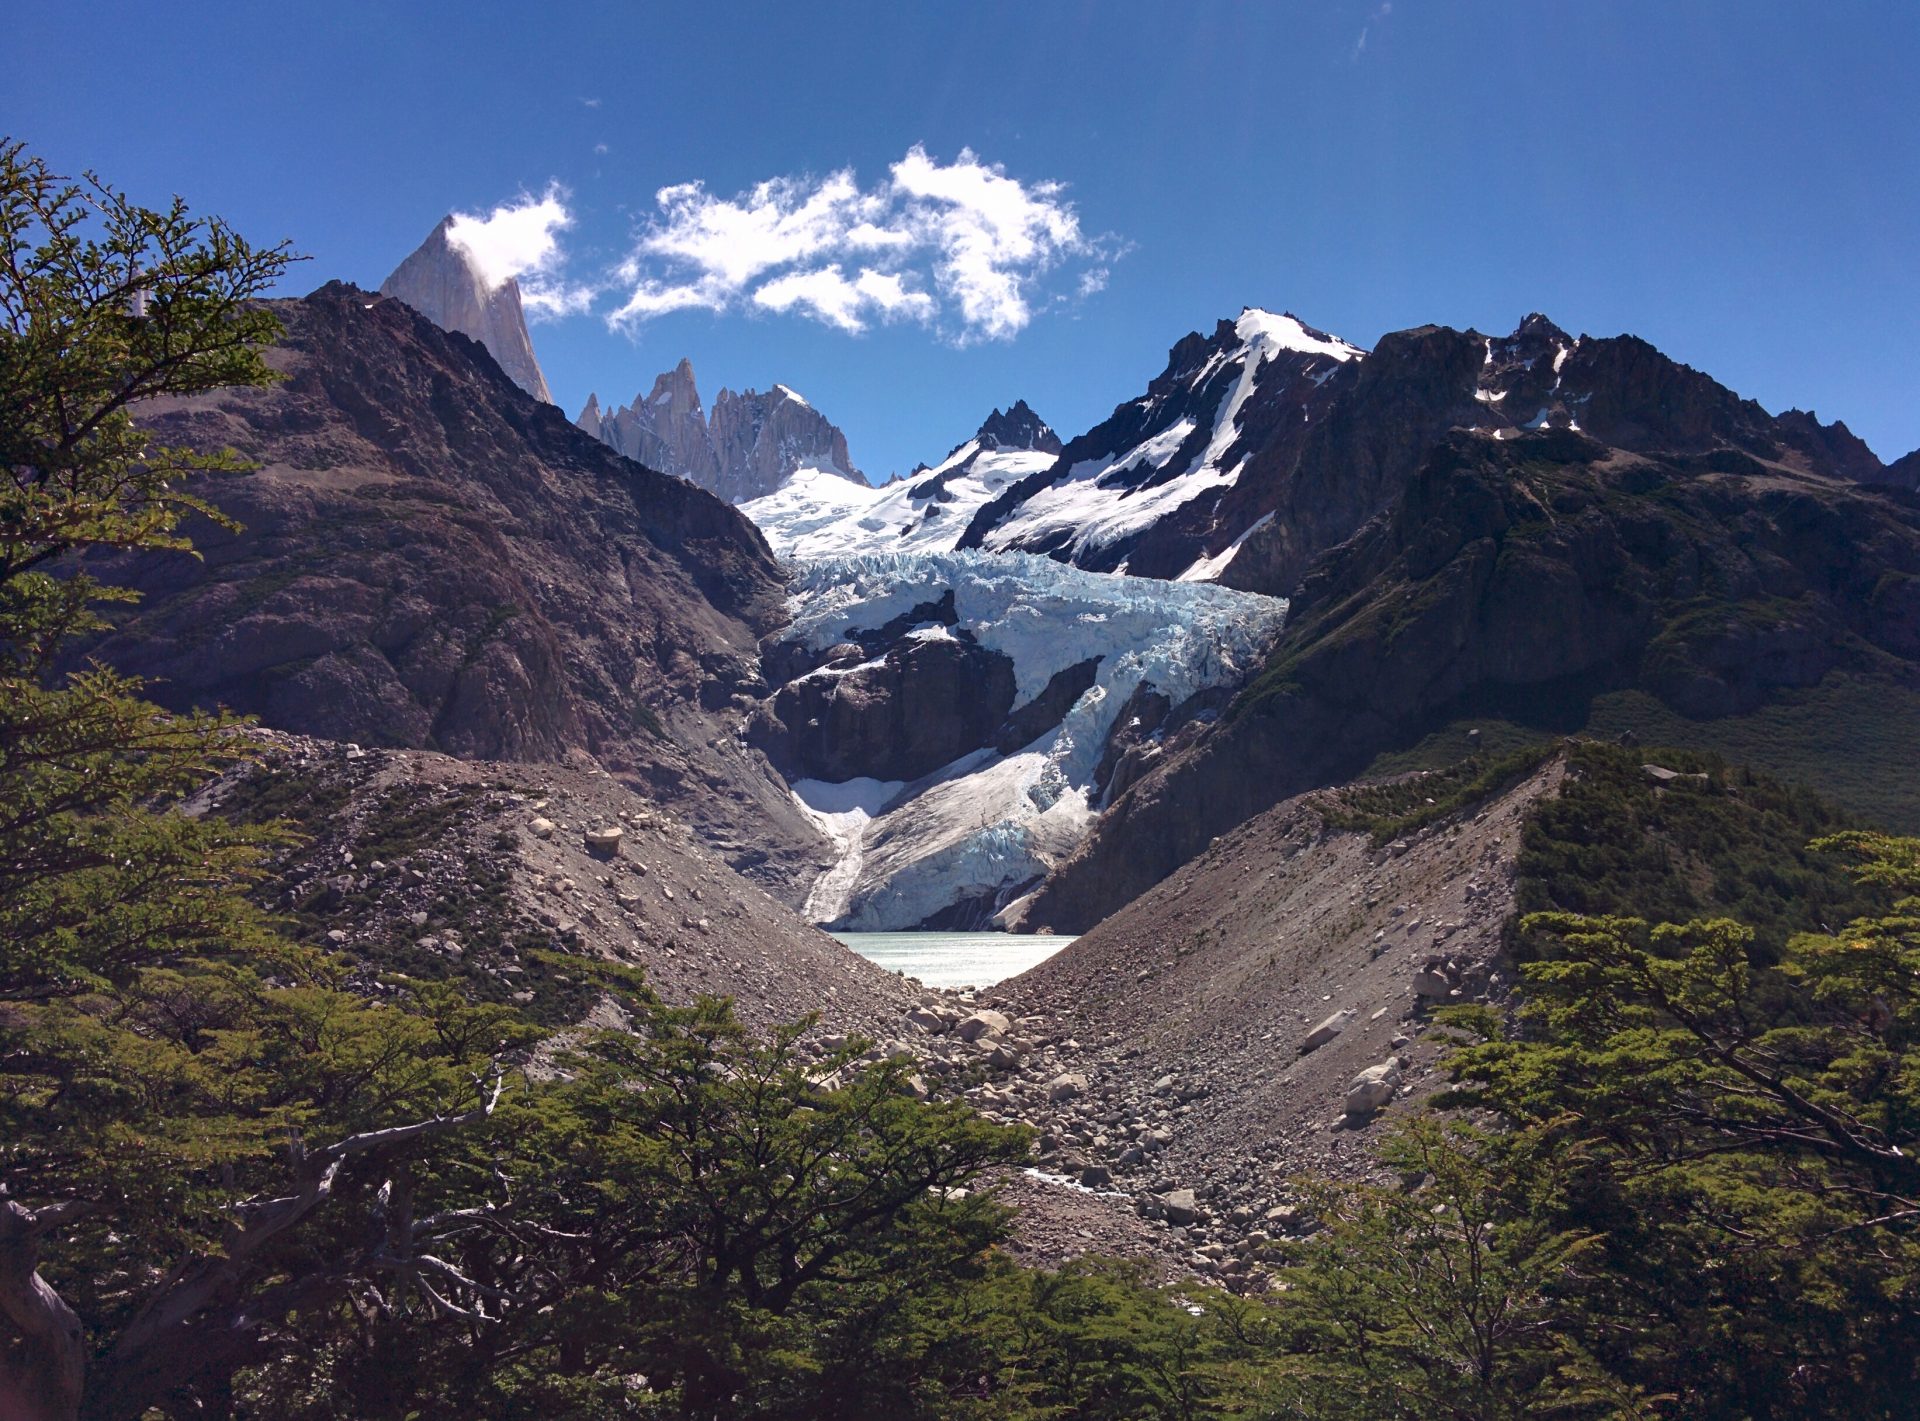 A glacier coming from the moutains behind a vallley.